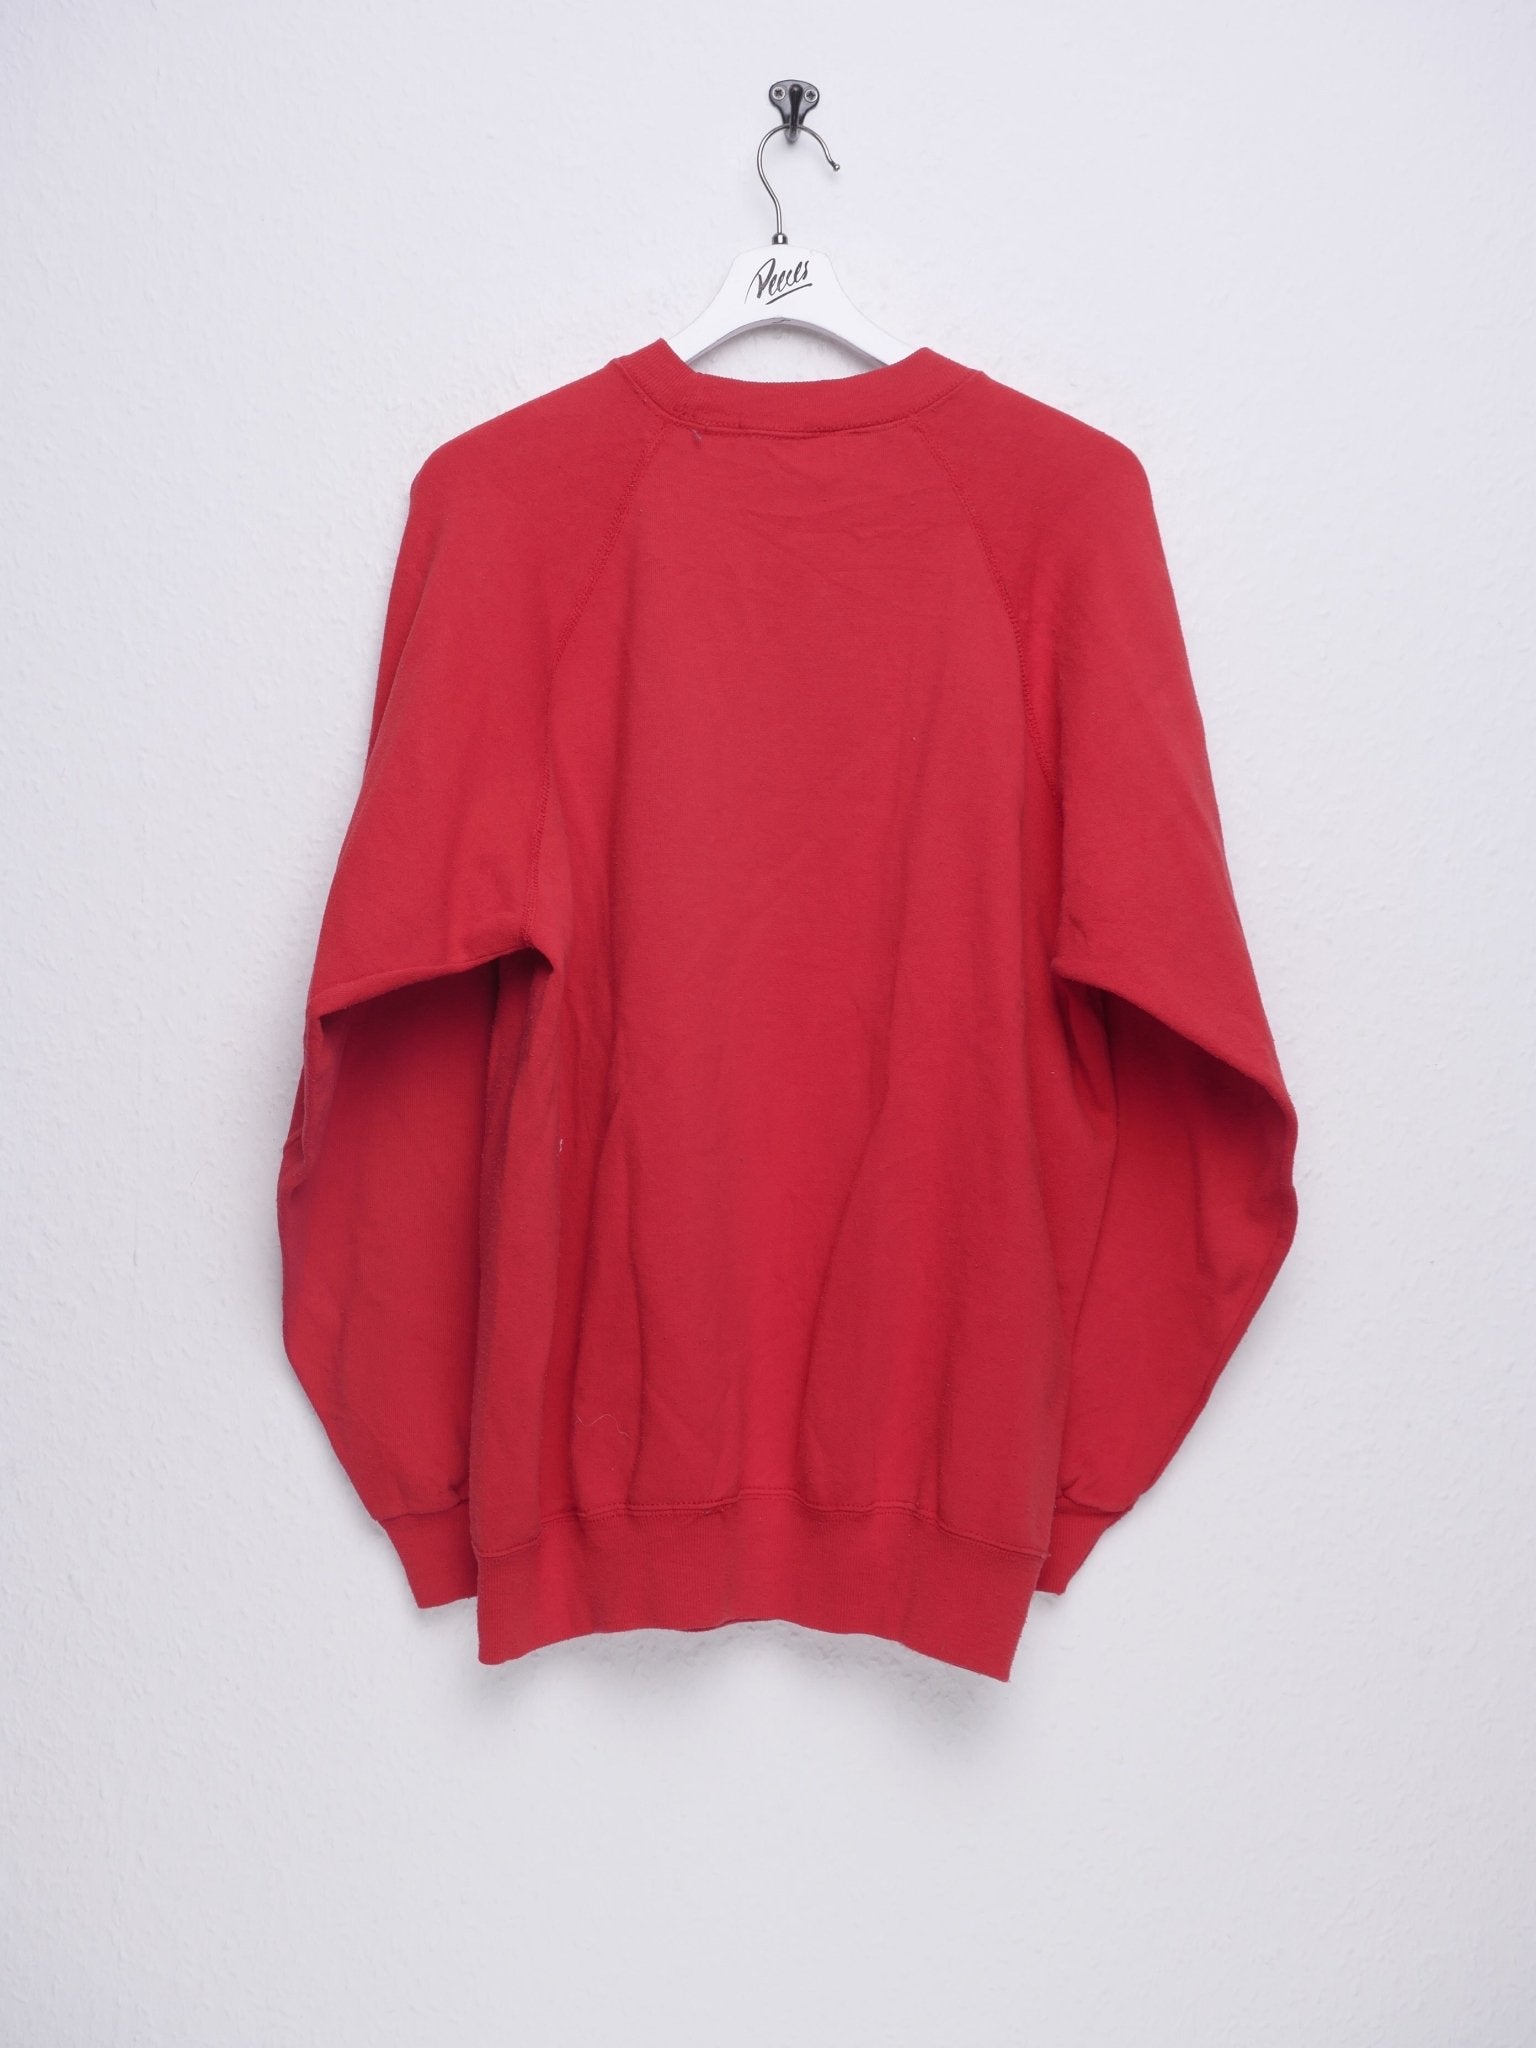 printed Countrywide red Sweater - Peeces